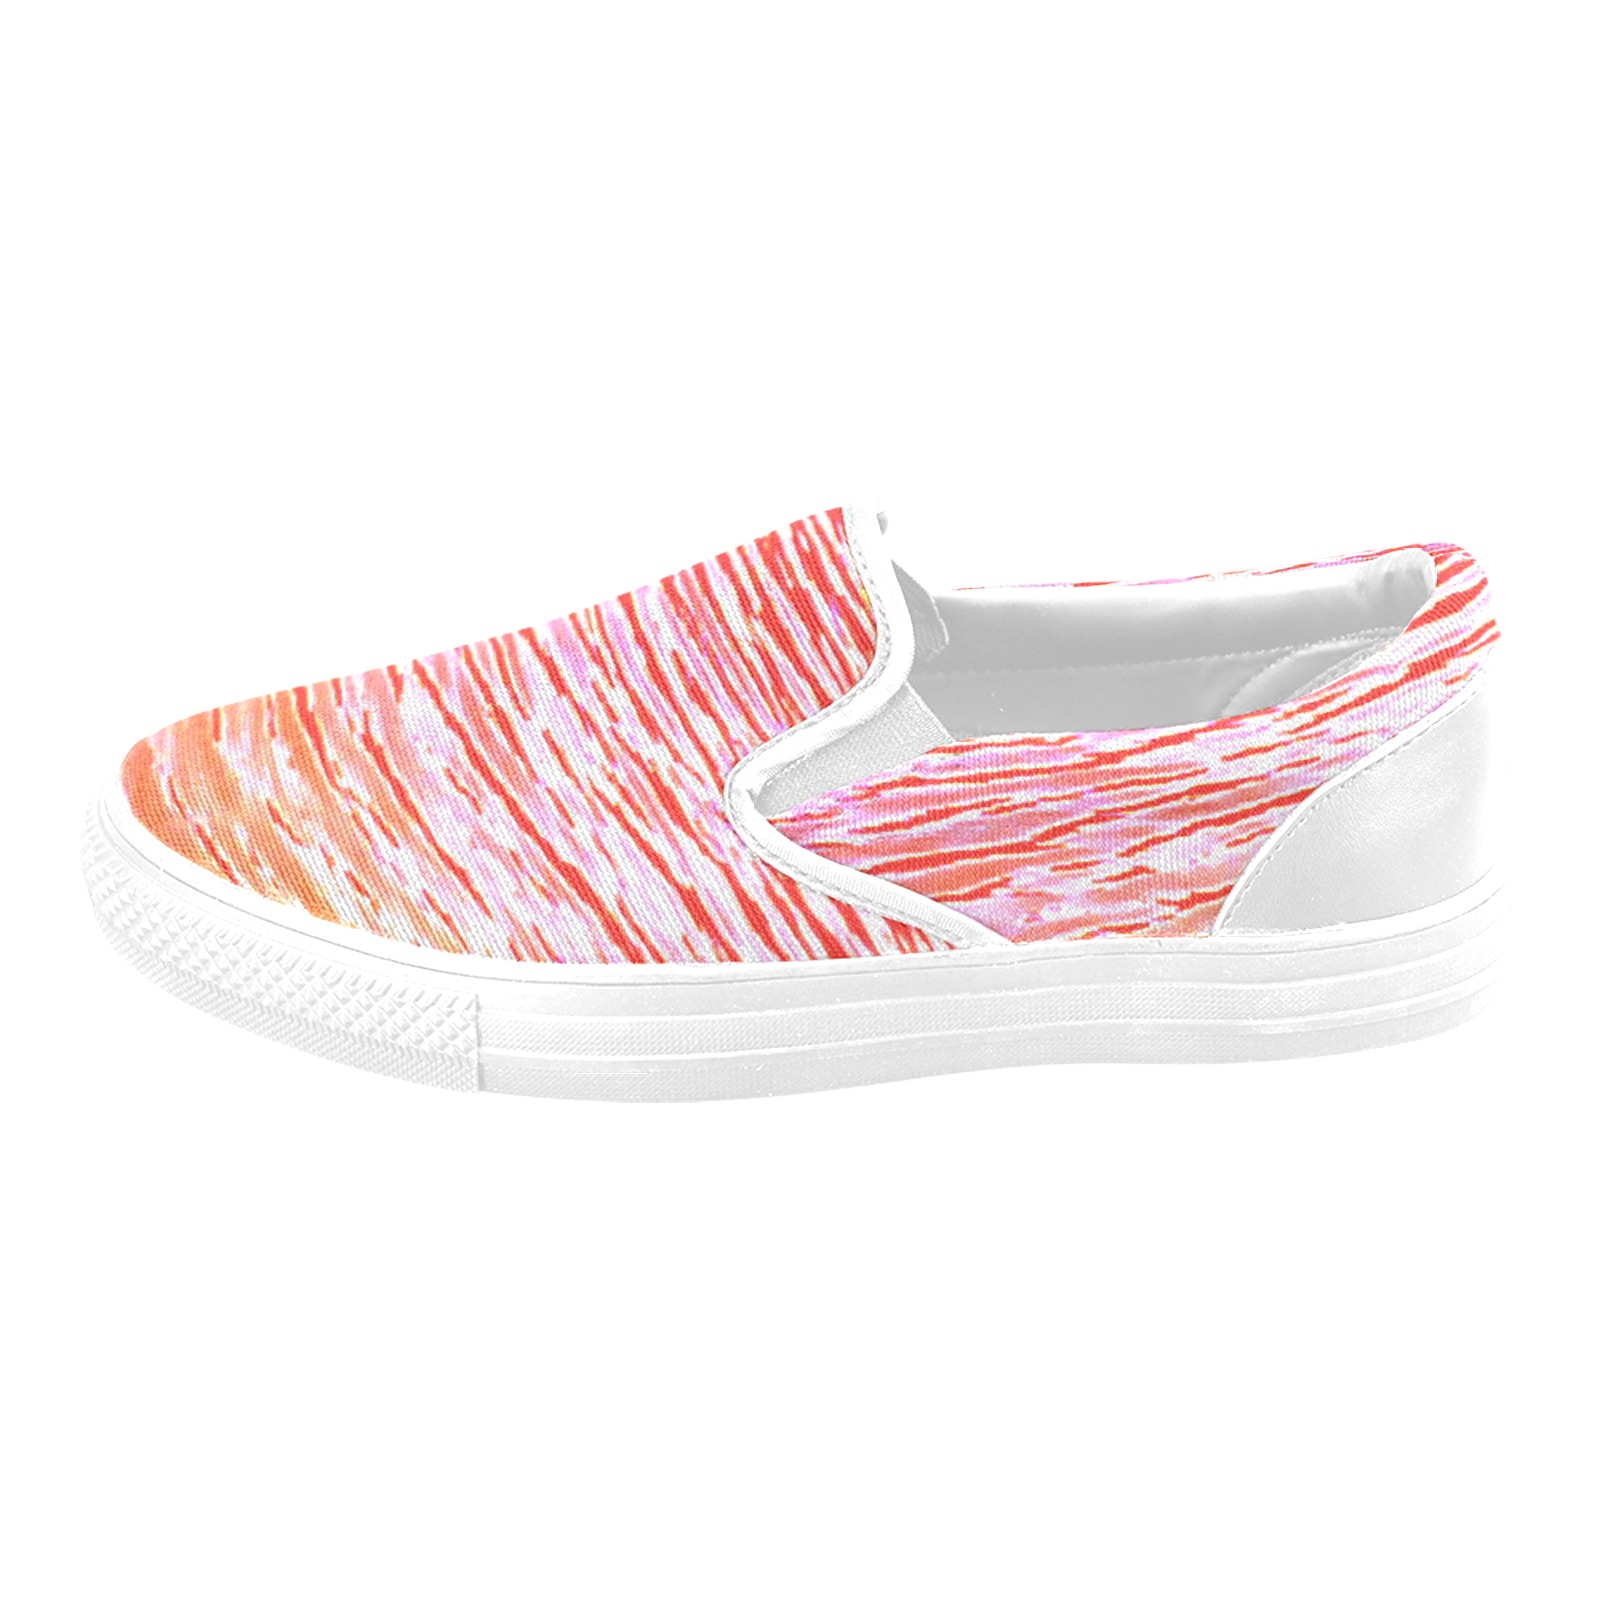 Orange and red water Women's Unusual Slip-on Canvas Shoes (Model 019)